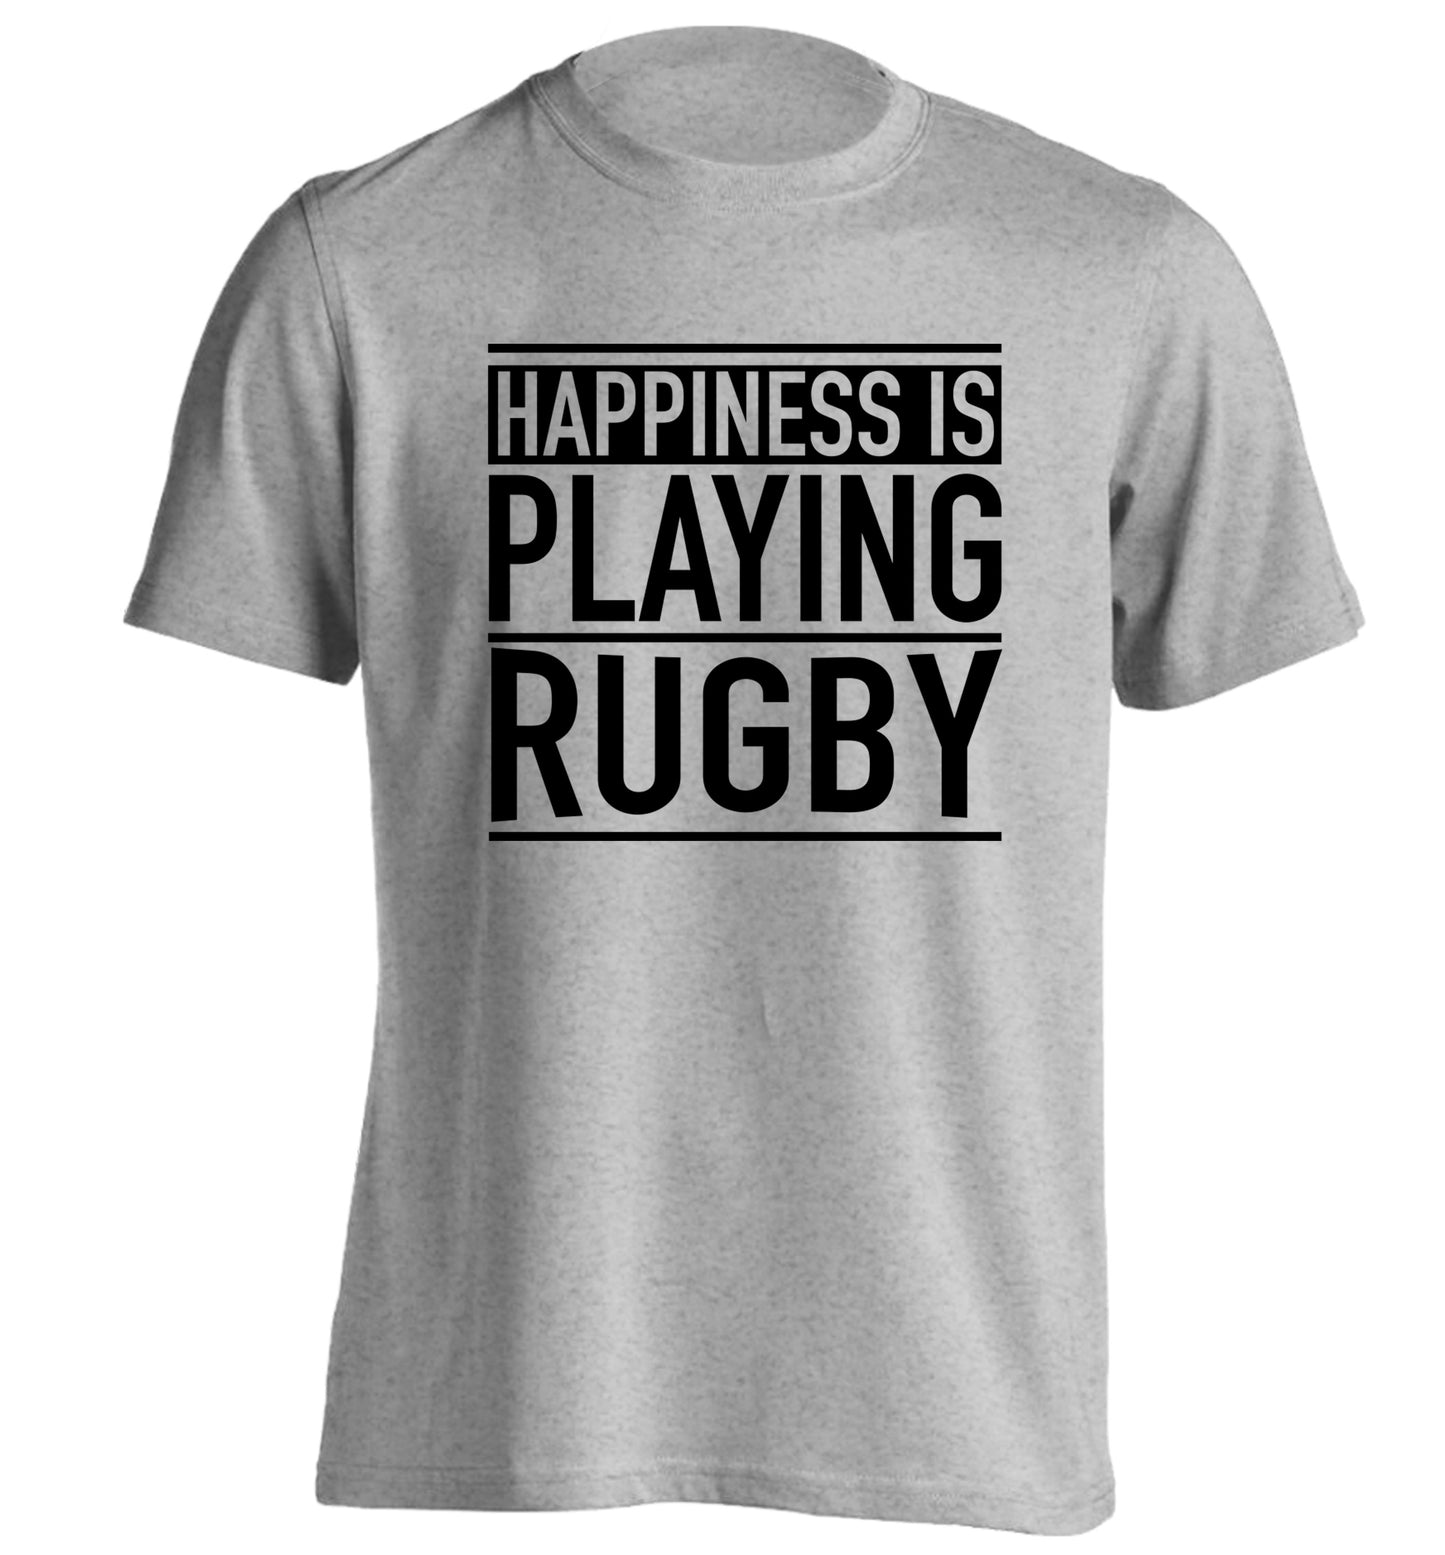 Happiness is playing rugby adults unisex grey Tshirt 2XL